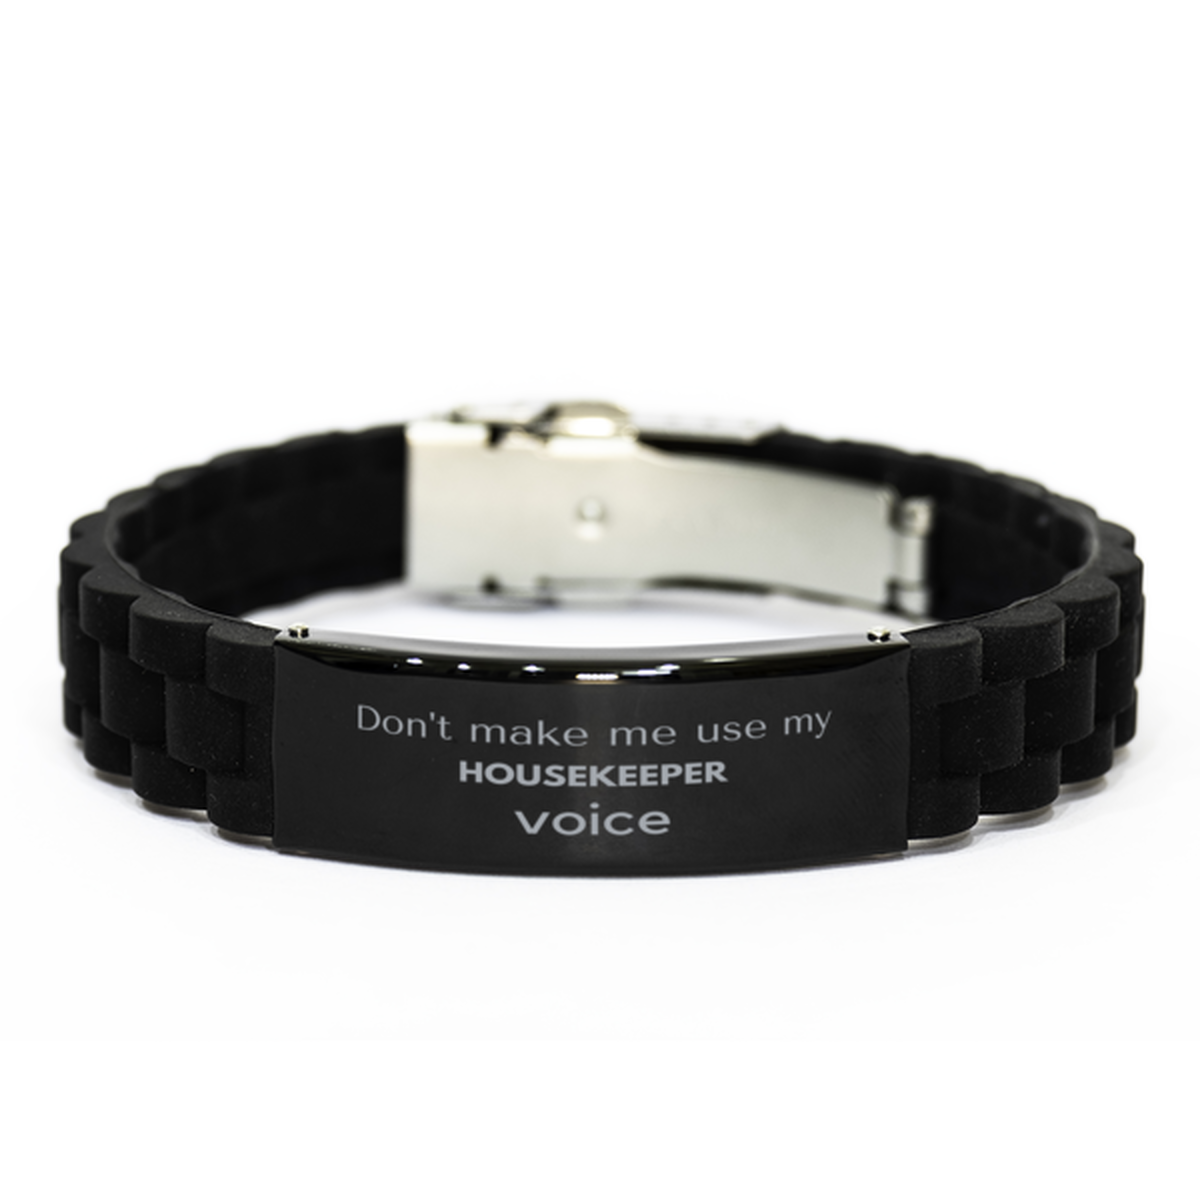 Don't make me use my Housekeeper voice, Sarcasm Housekeeper Gifts, Christmas Housekeeper Black Glidelock Clasp Bracelet Birthday Unique Gifts For Housekeeper Coworkers, Men, Women, Colleague, Friends